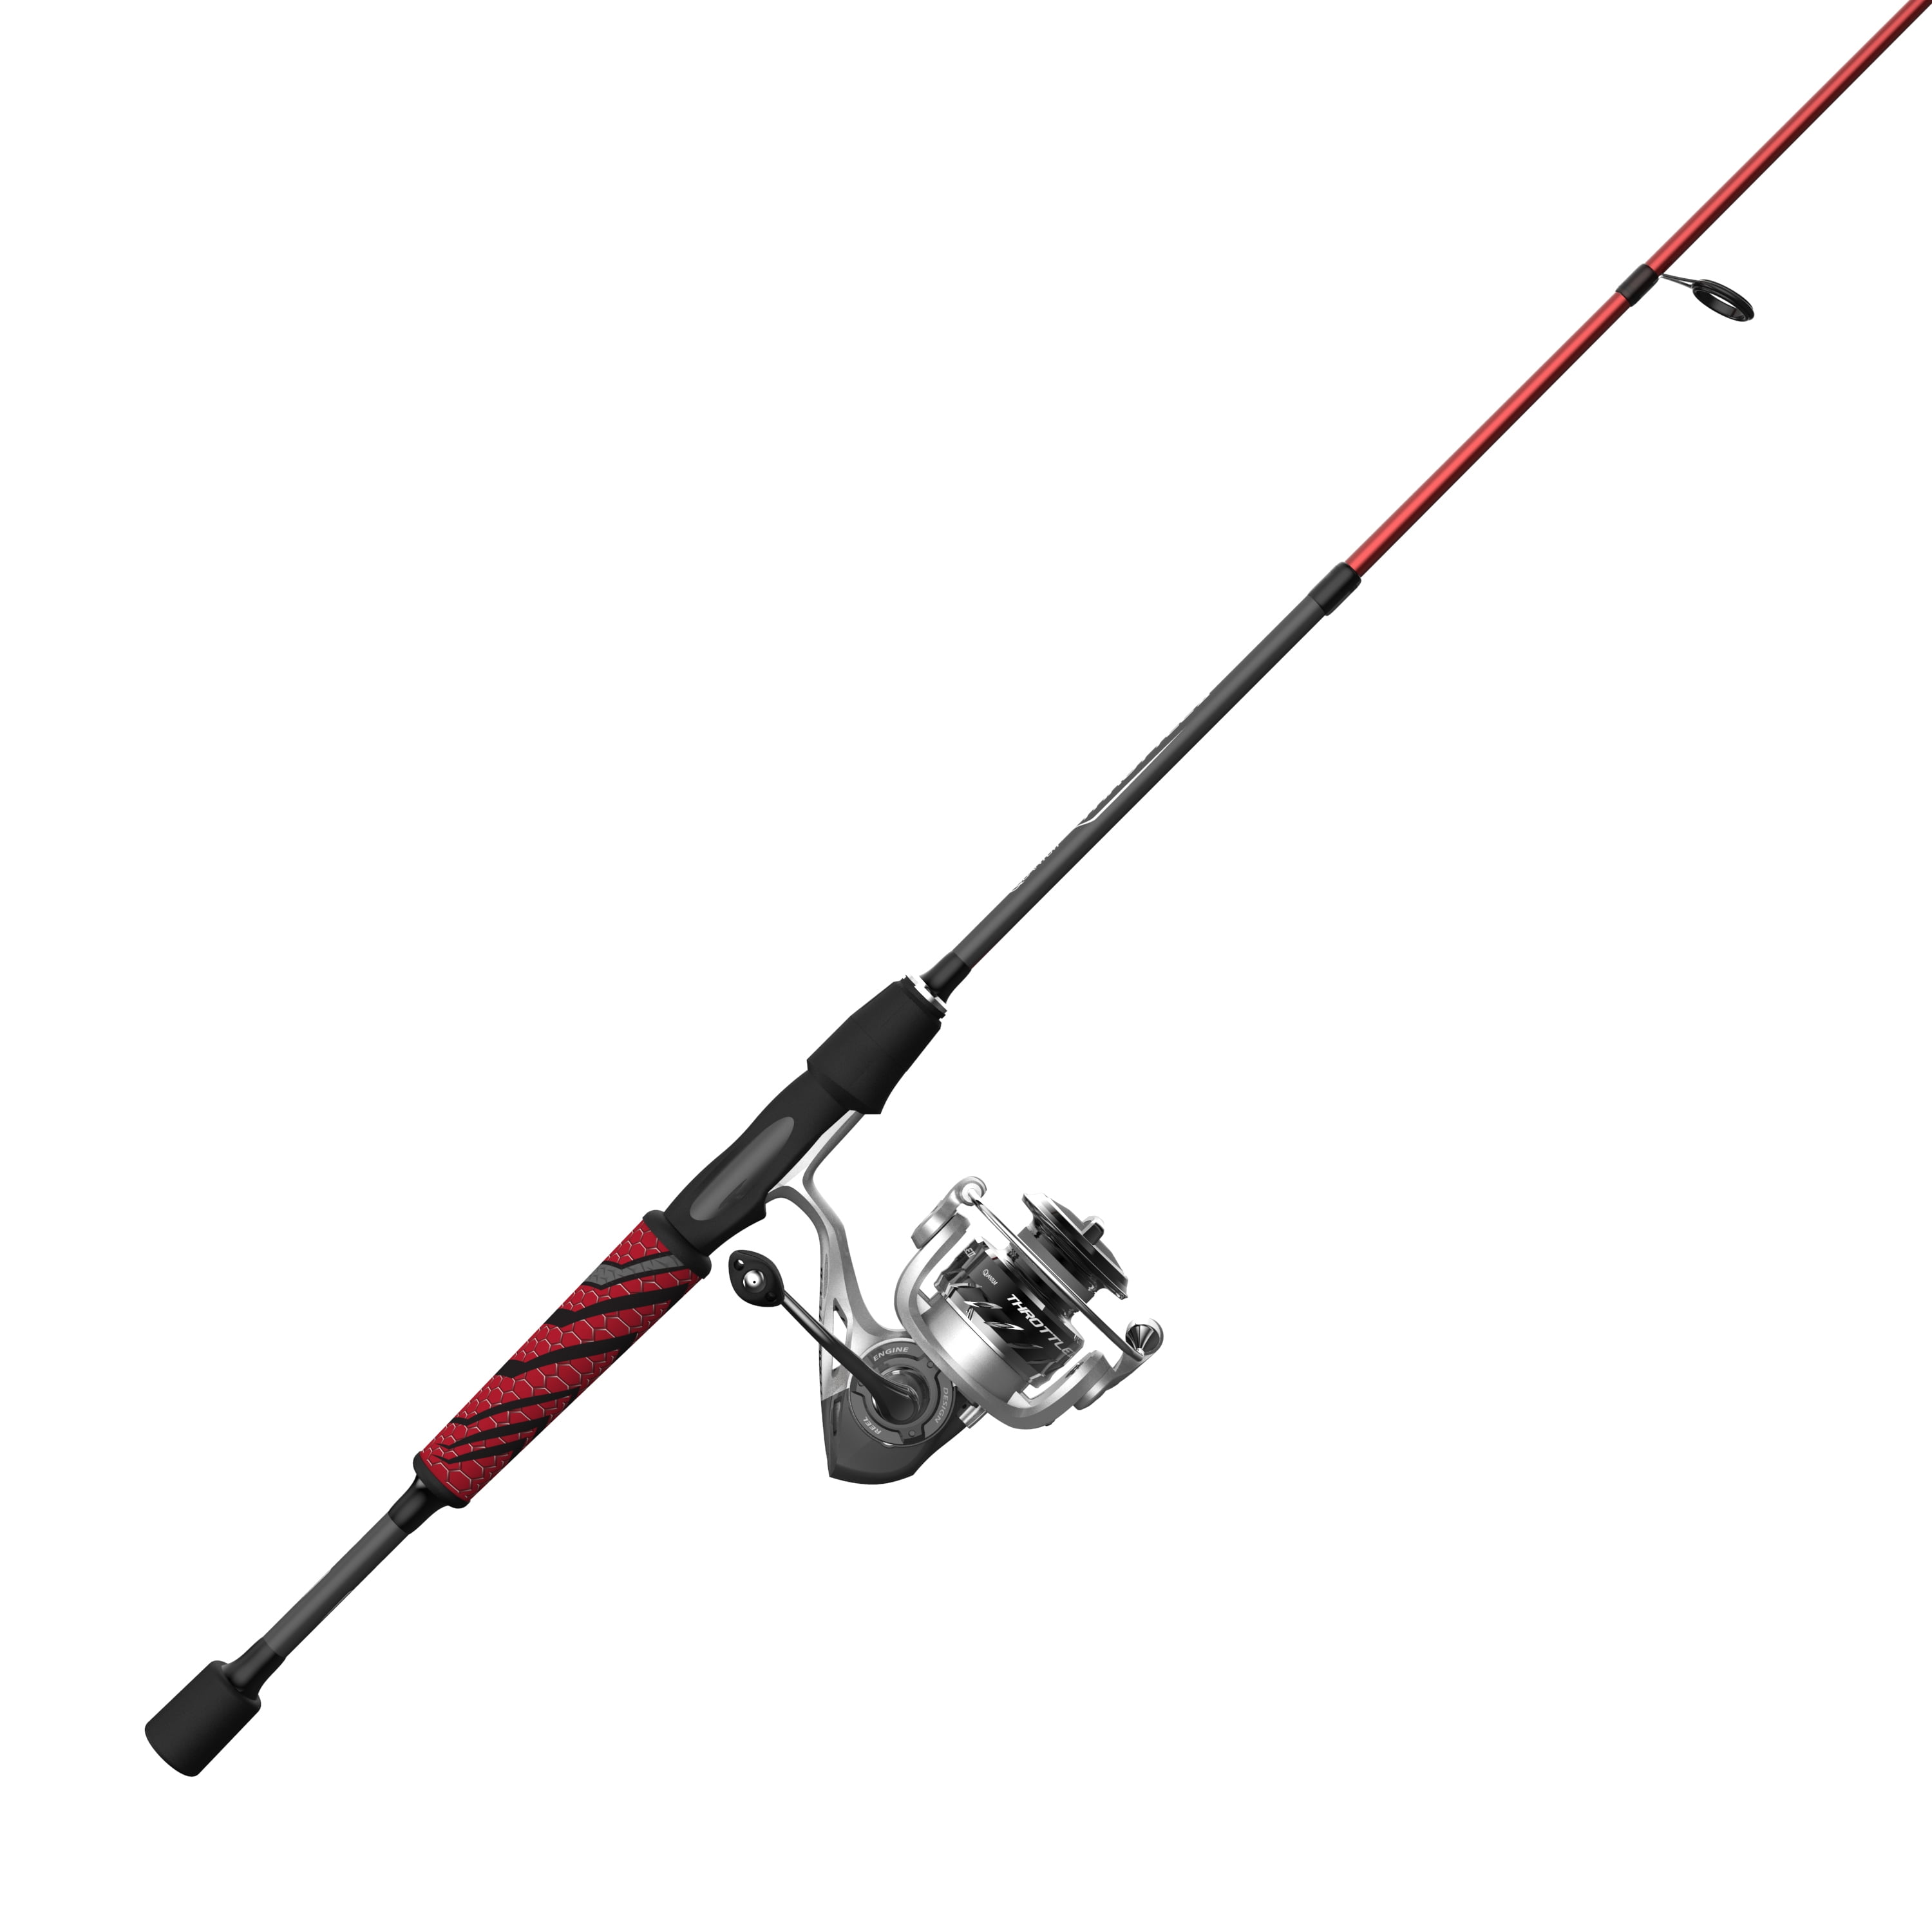  Okuma Boundary 7-Feet Medium Action 40 Sized Reel Spinning  Combo, Grey/Silver/Red : Spinning Rod And Reel Combos : Sports & Outdoors